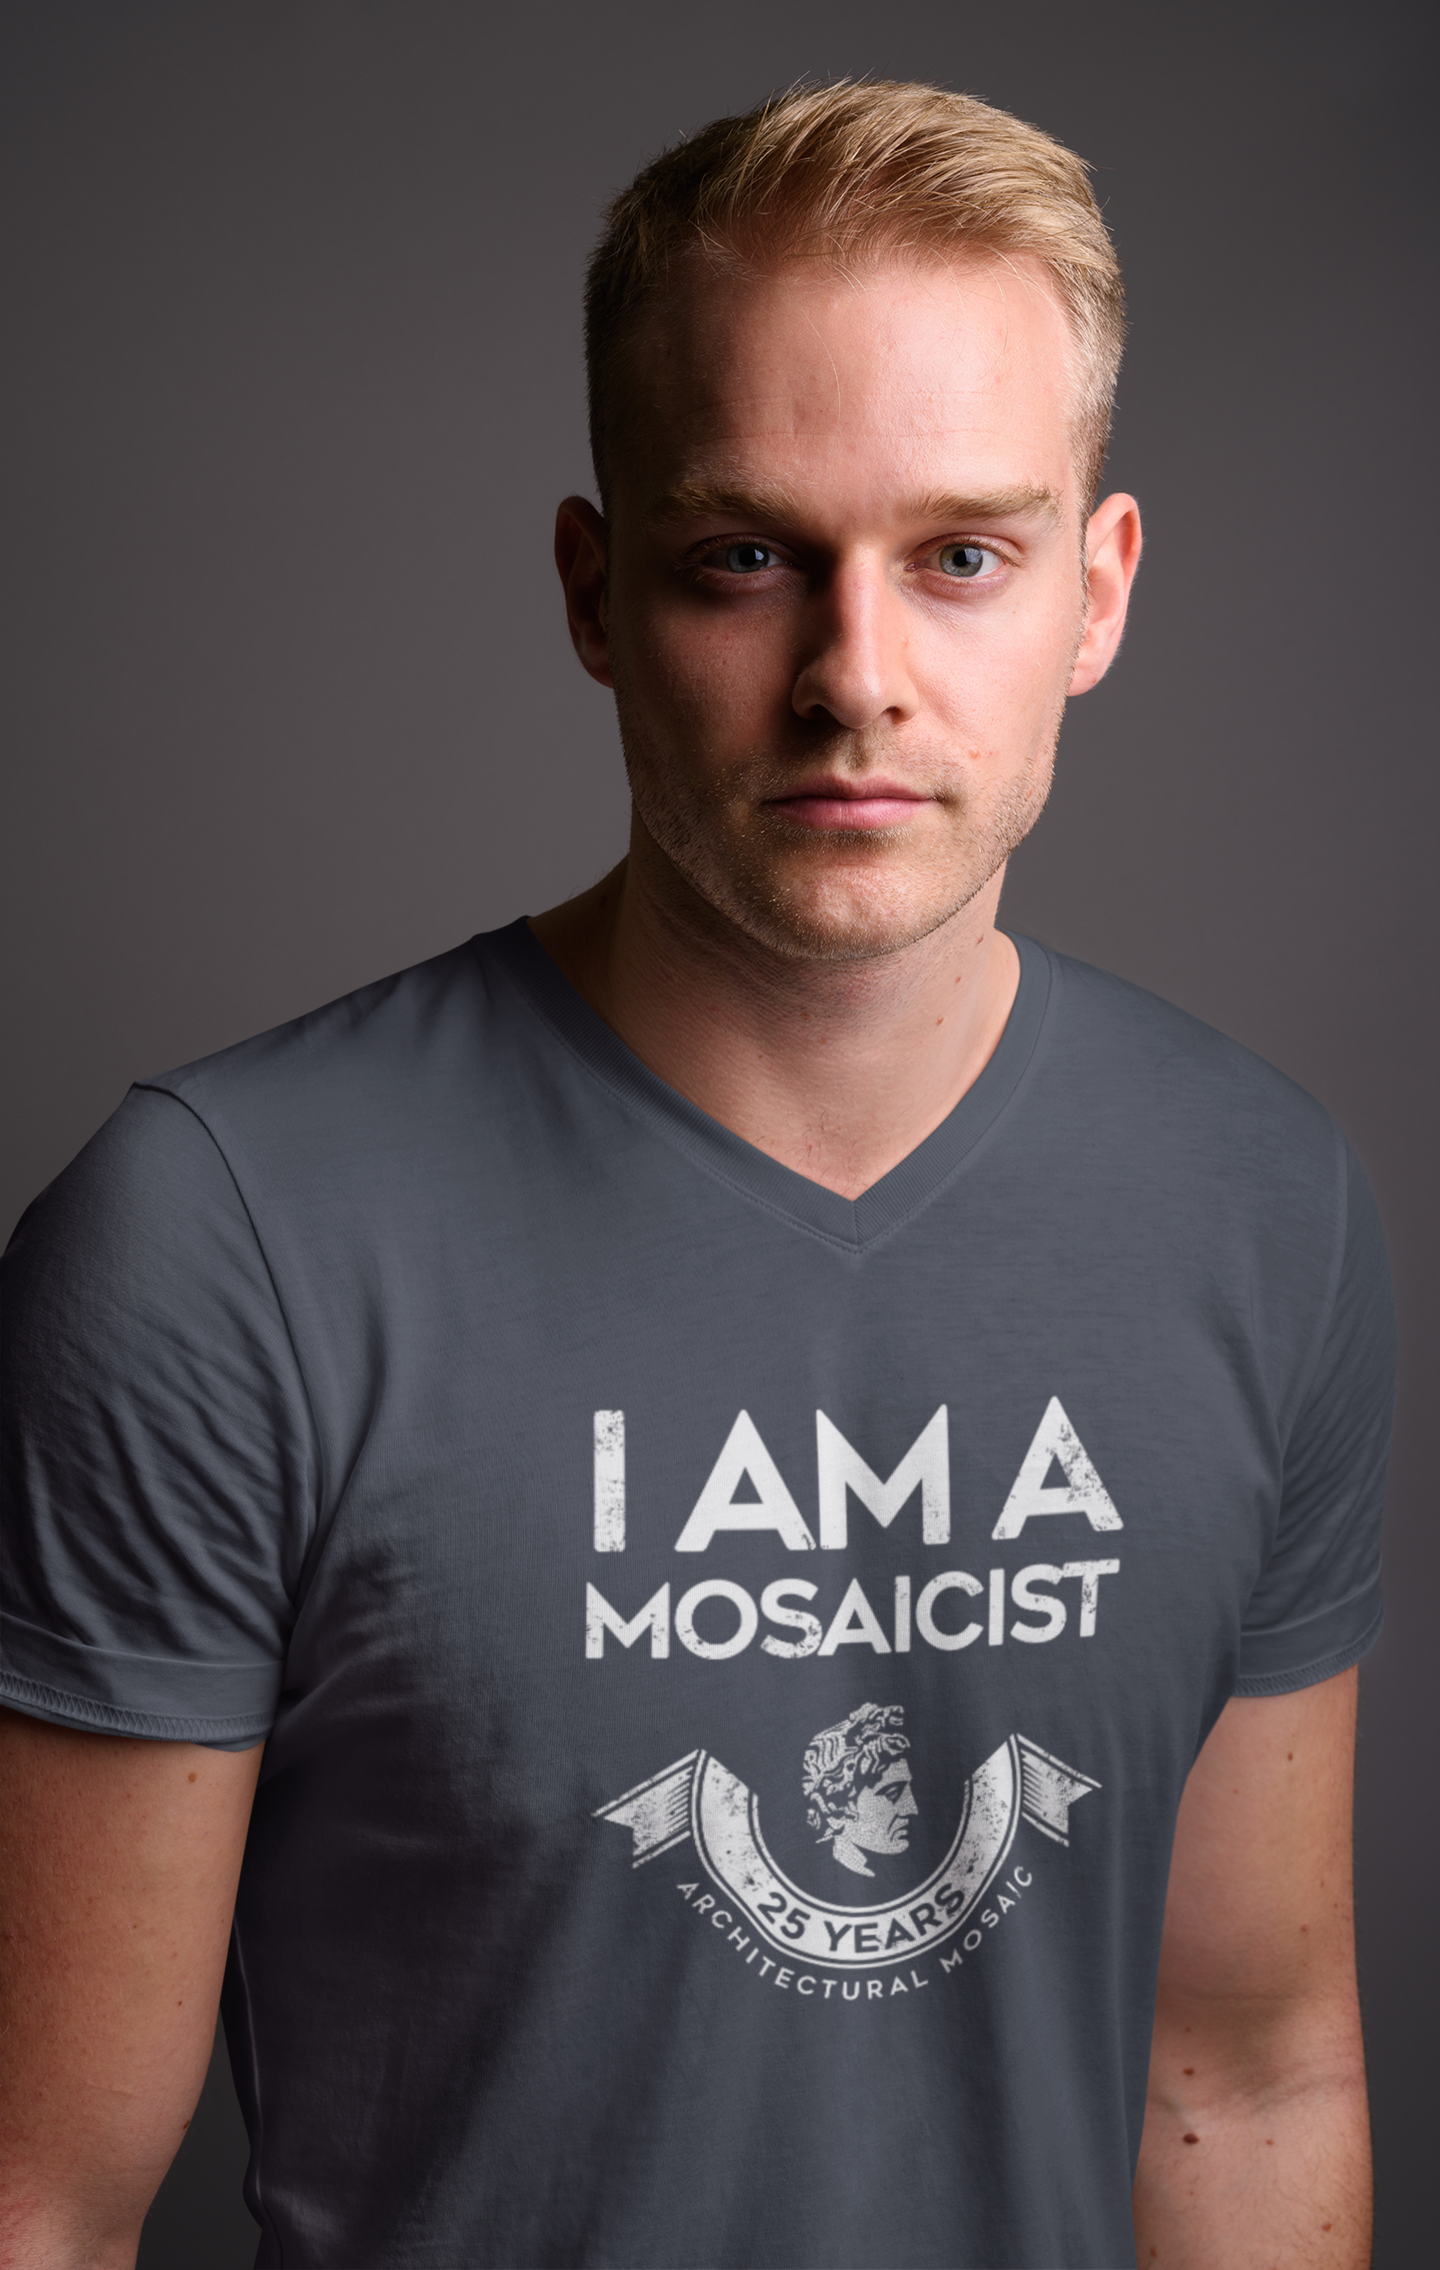 "I AM A MOSAICIST" V-Neck T-shirt from Mosaicist - Graphite